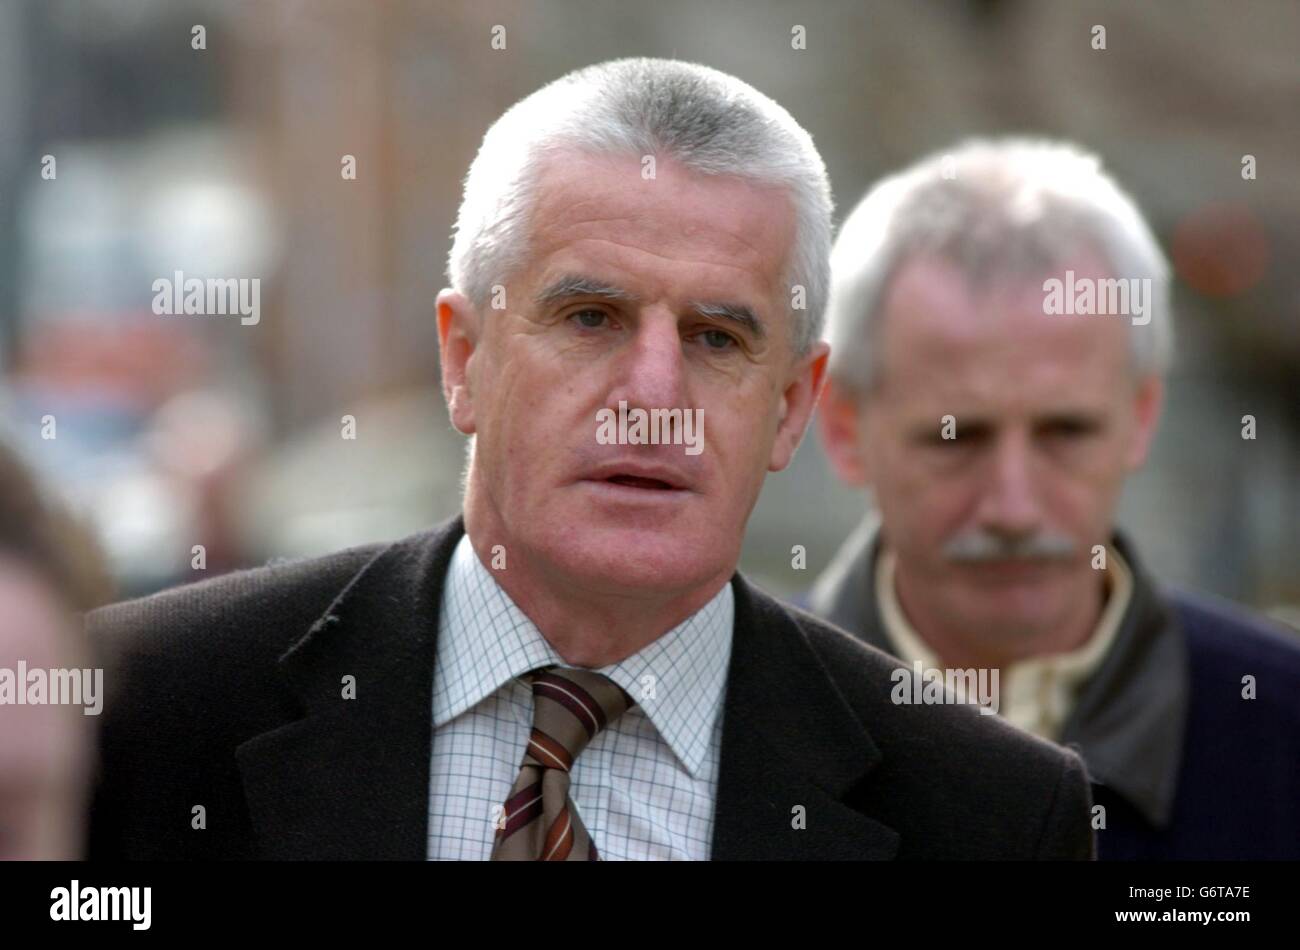 Denis Murphy, the father of 18-year-old student, Brian Murphy - who died after he was kicked and beaten to death after a student night at Club Anabel in the Burlington Hotel, Dublin on August 31, 2000 - arriving at the Dublin Central Criminal Court, Dublin, Ireland, Monday March 15, 2004. Dermot Laide, 22, was sentenced to four years for manslaughter and a further two years for violent disorder, to run concurrently. Co-accused Sean Mackey, 23, was jailed for two years and Desmond Ryan, 23, for nine months, both for violent disorder. Stock Photo